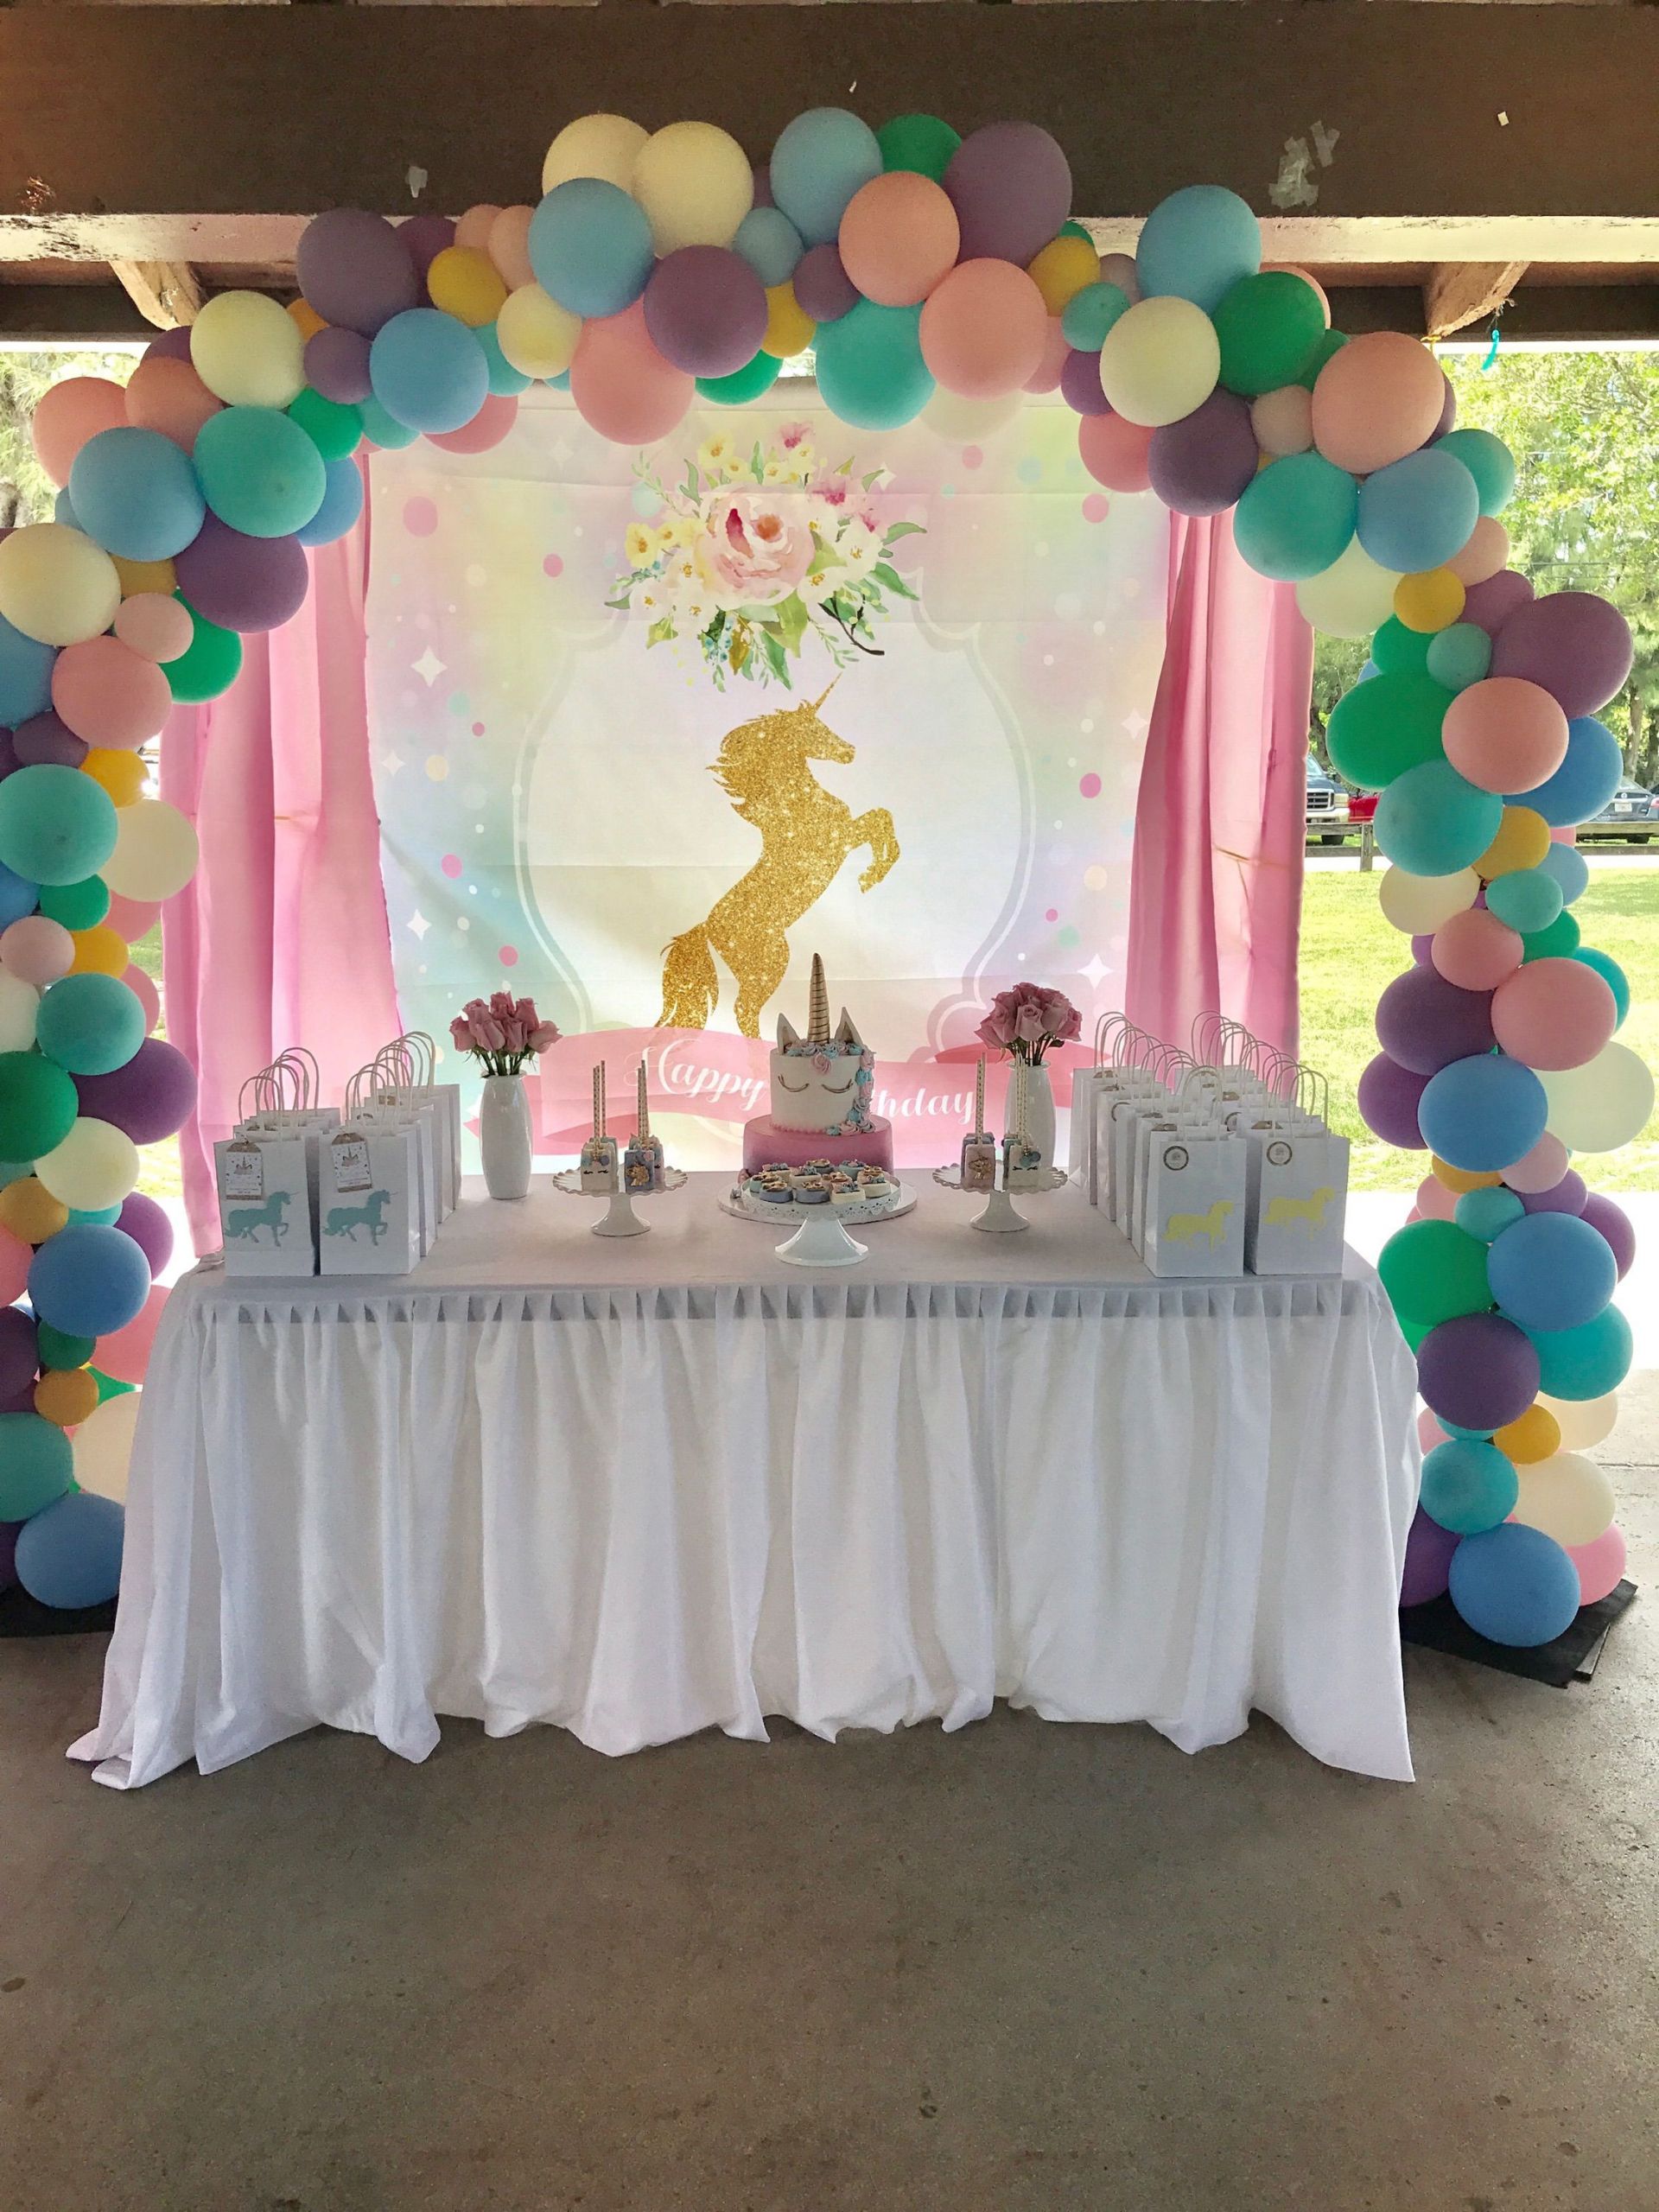 Unicorn Party Decorating Ideas
 Unicorn Birthday Party by Premiere Party Rental in 2019